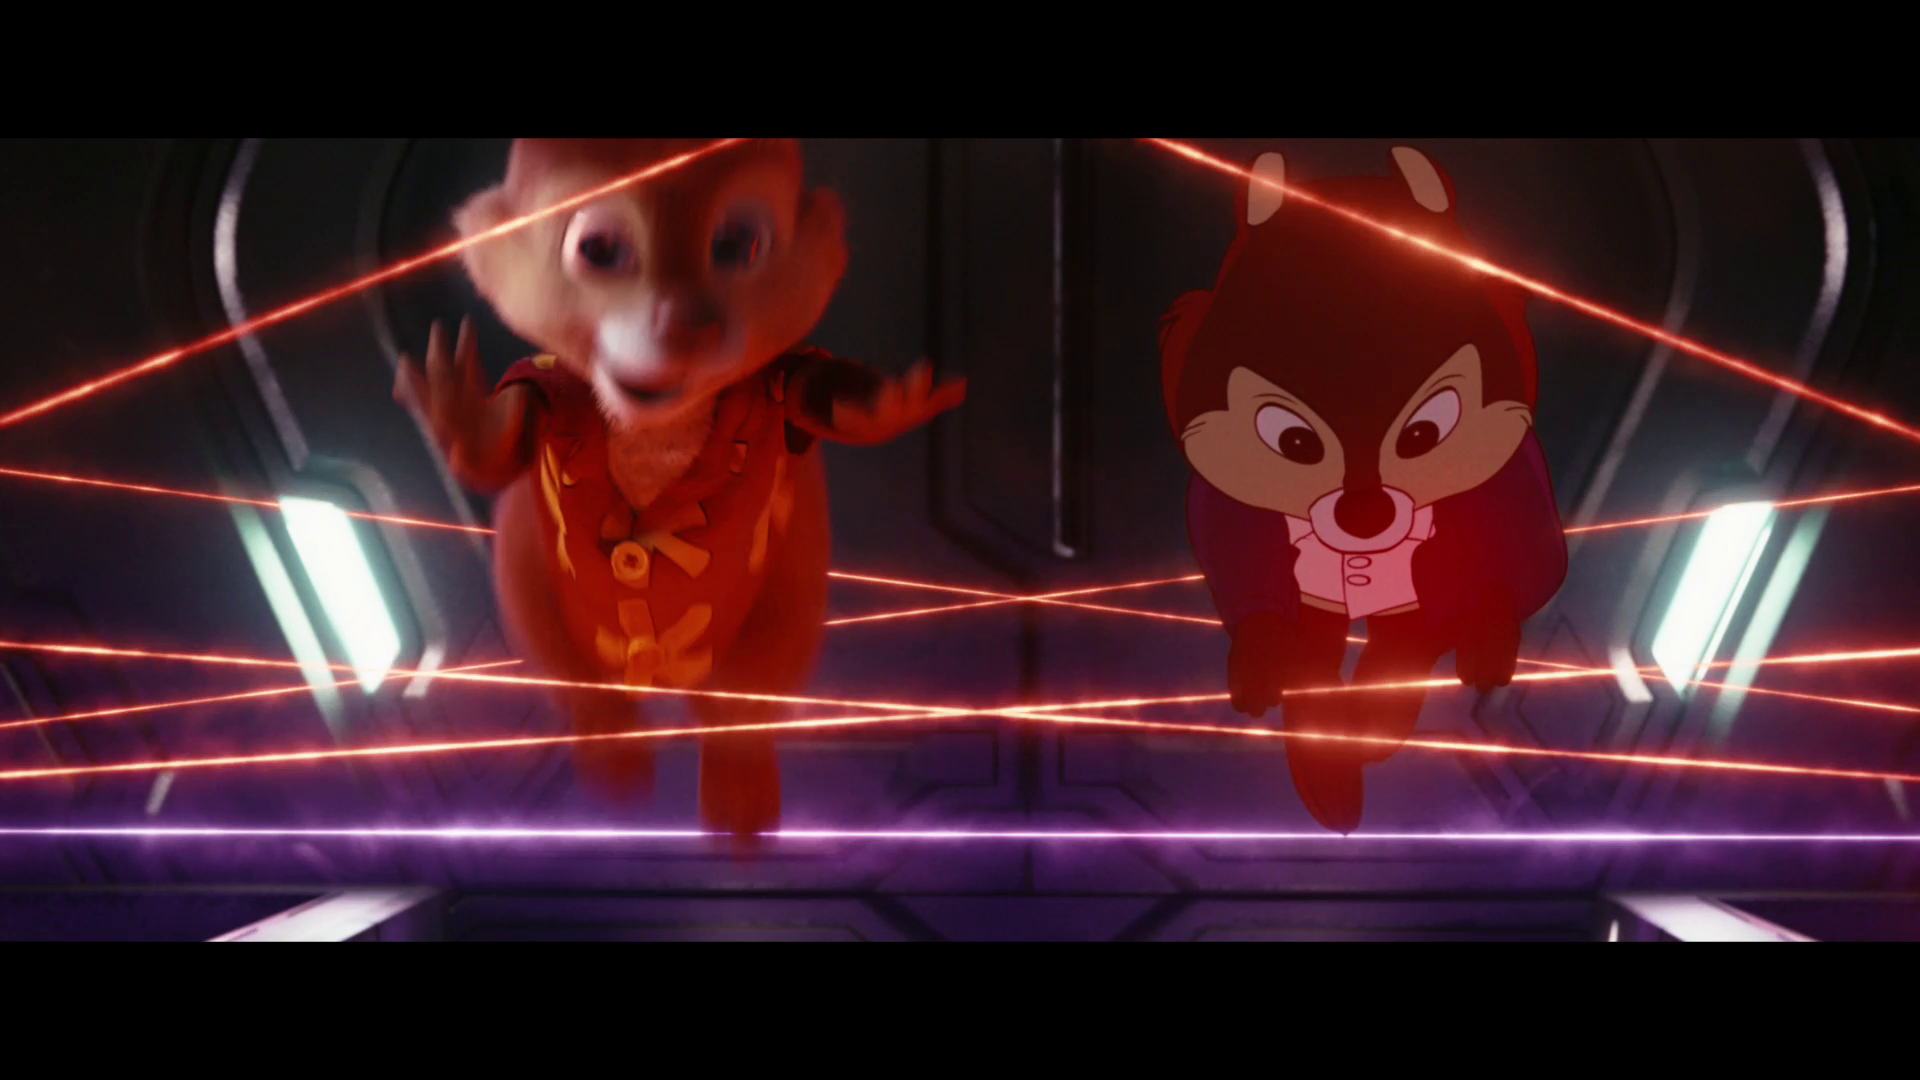 Review: New Chip 'N Dale movie hilariously spoofs classic games, cartoons |  Ars Technica